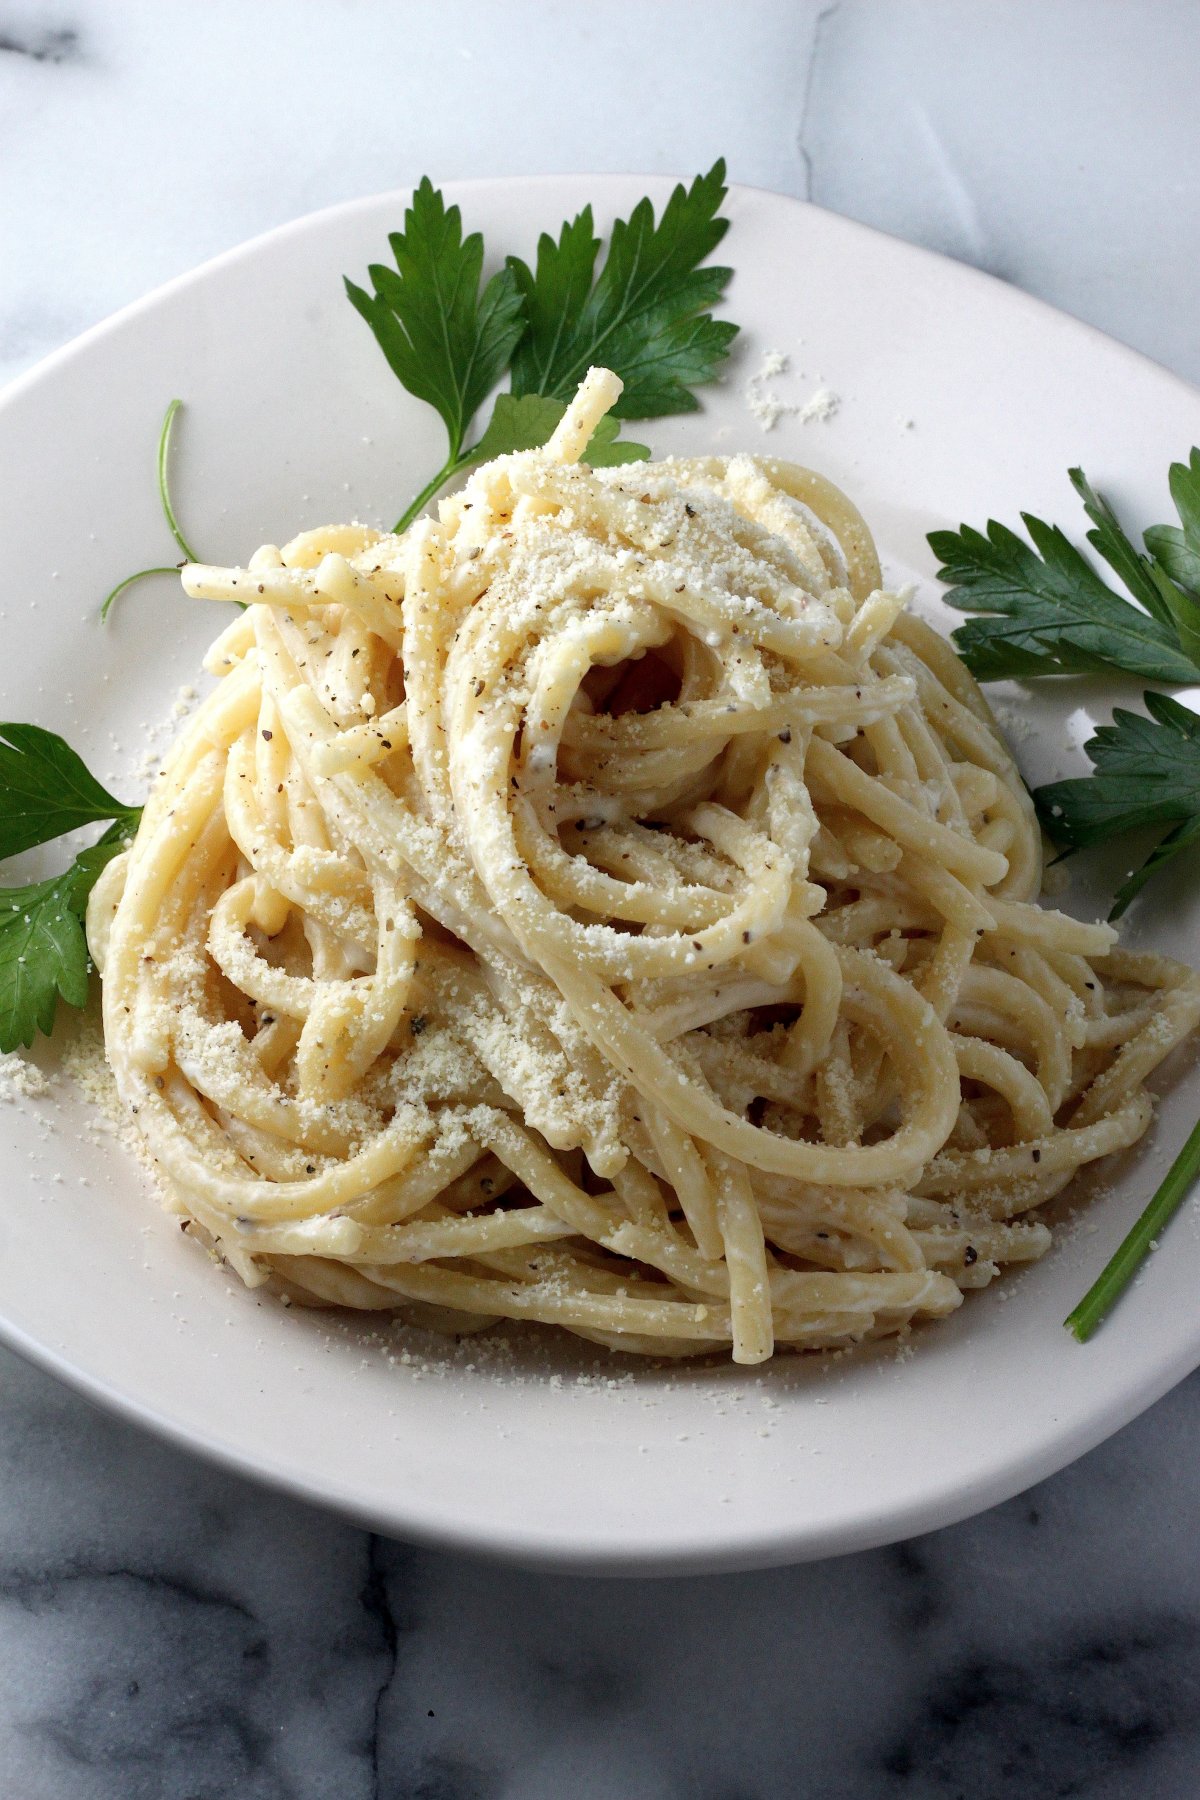 Where can one find the best cacio e pepe? Wherever it may be, our